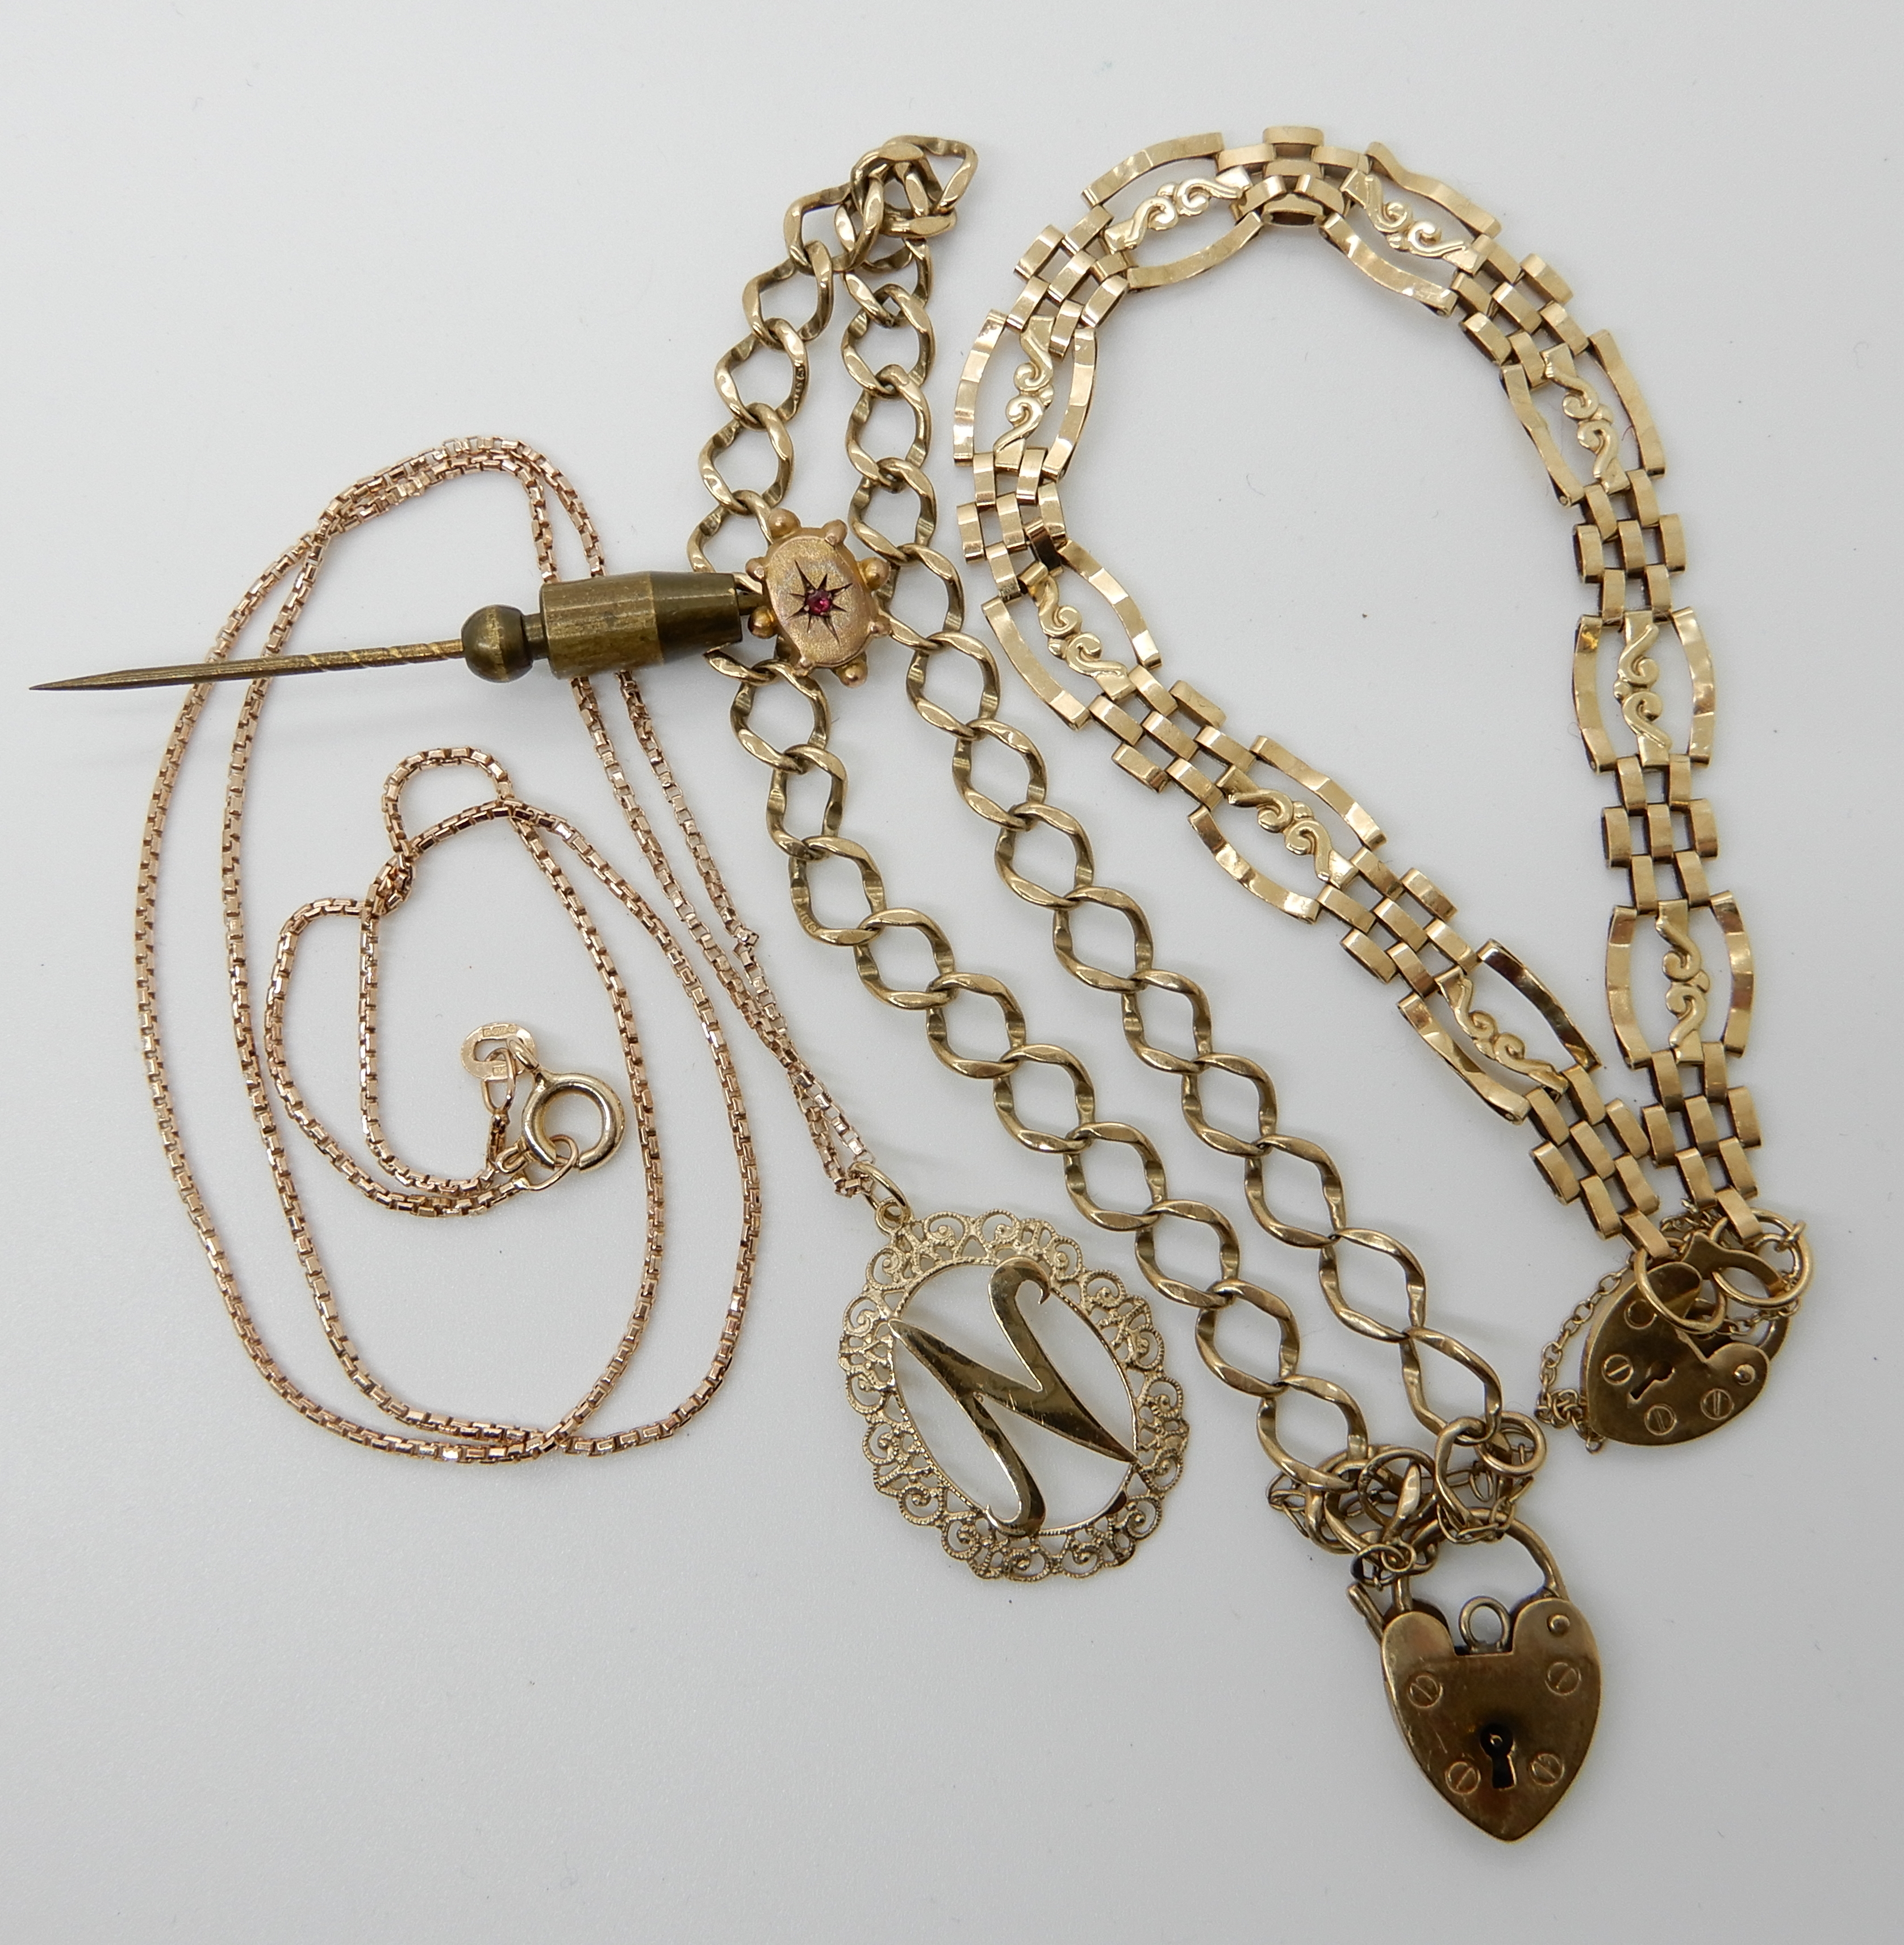 A 9ct gold chain with a 'N' pendant length 46cm, a 9ct gold fancy link gate bracelet with heart